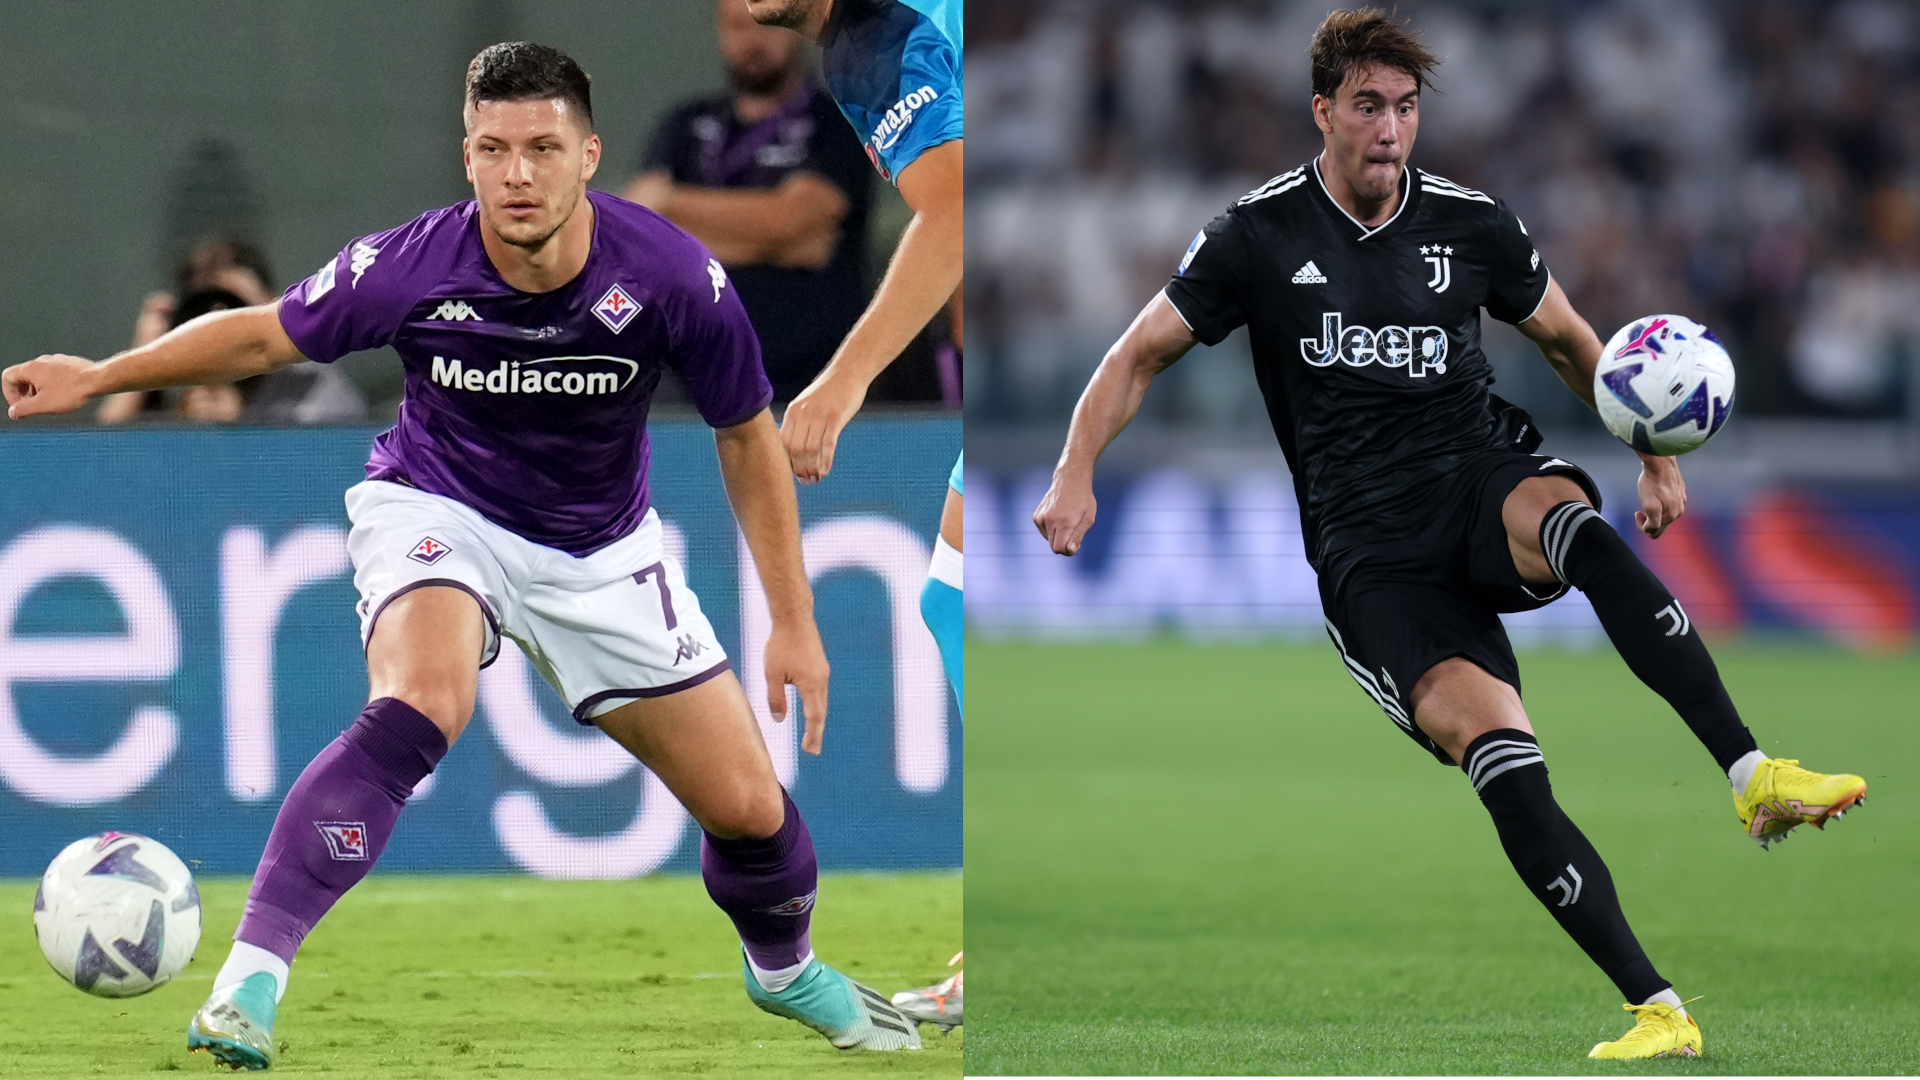 Fiorentina vs Juventus live stream how to watch Serie A online and on TV from anywhere, team news TechRadar